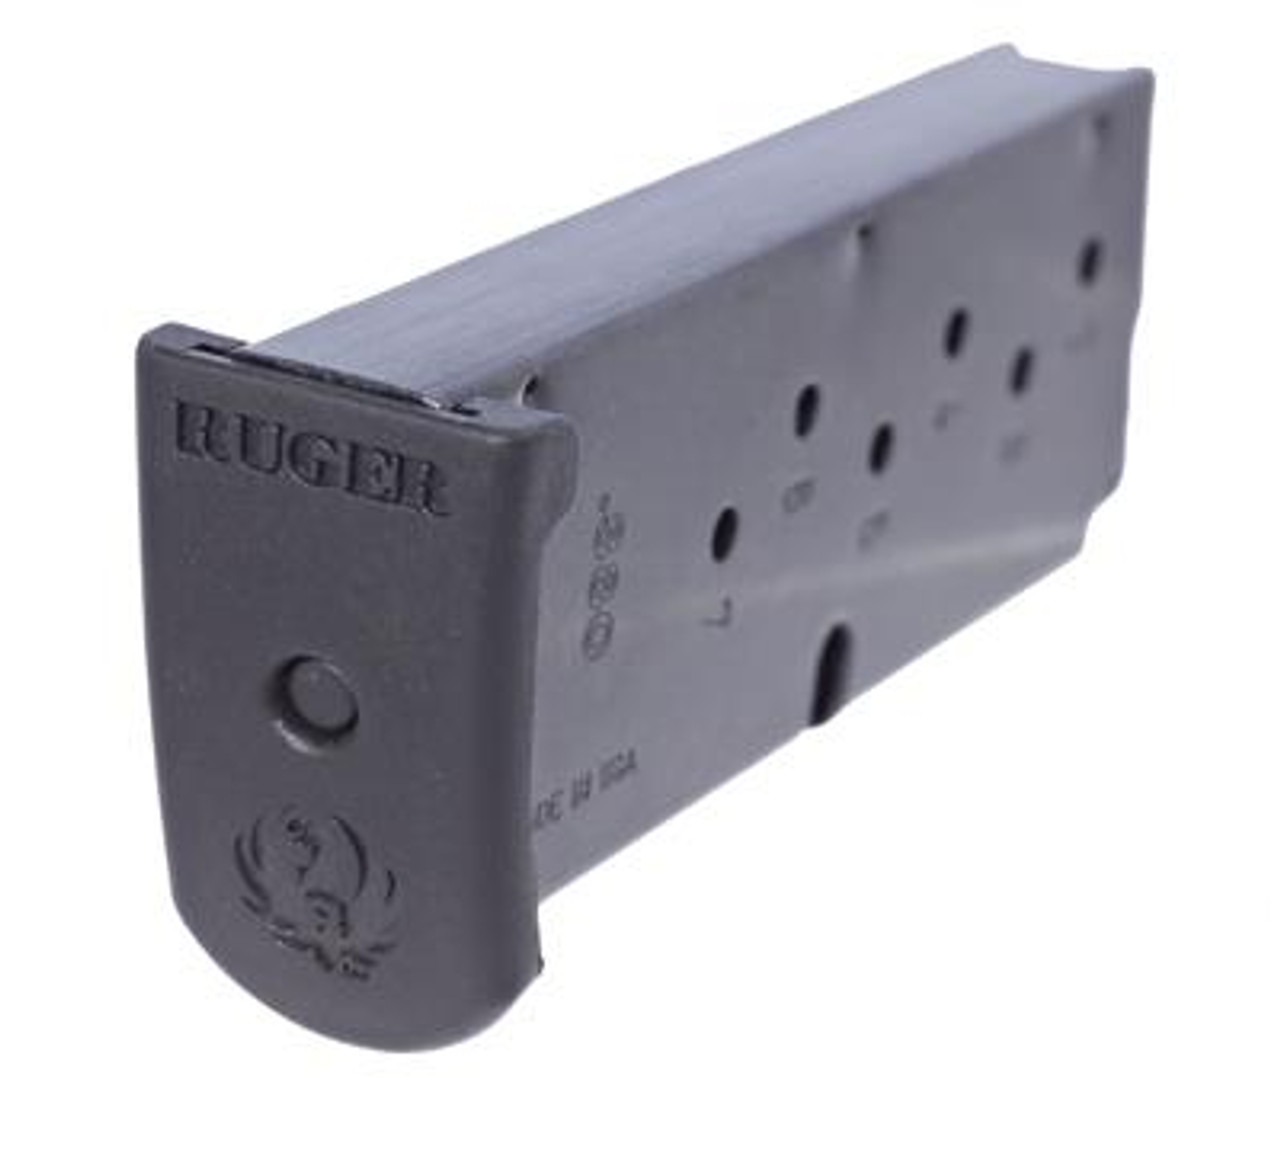 Ruger LC380 0.380 ACP 7 Round Magazine for sale online 